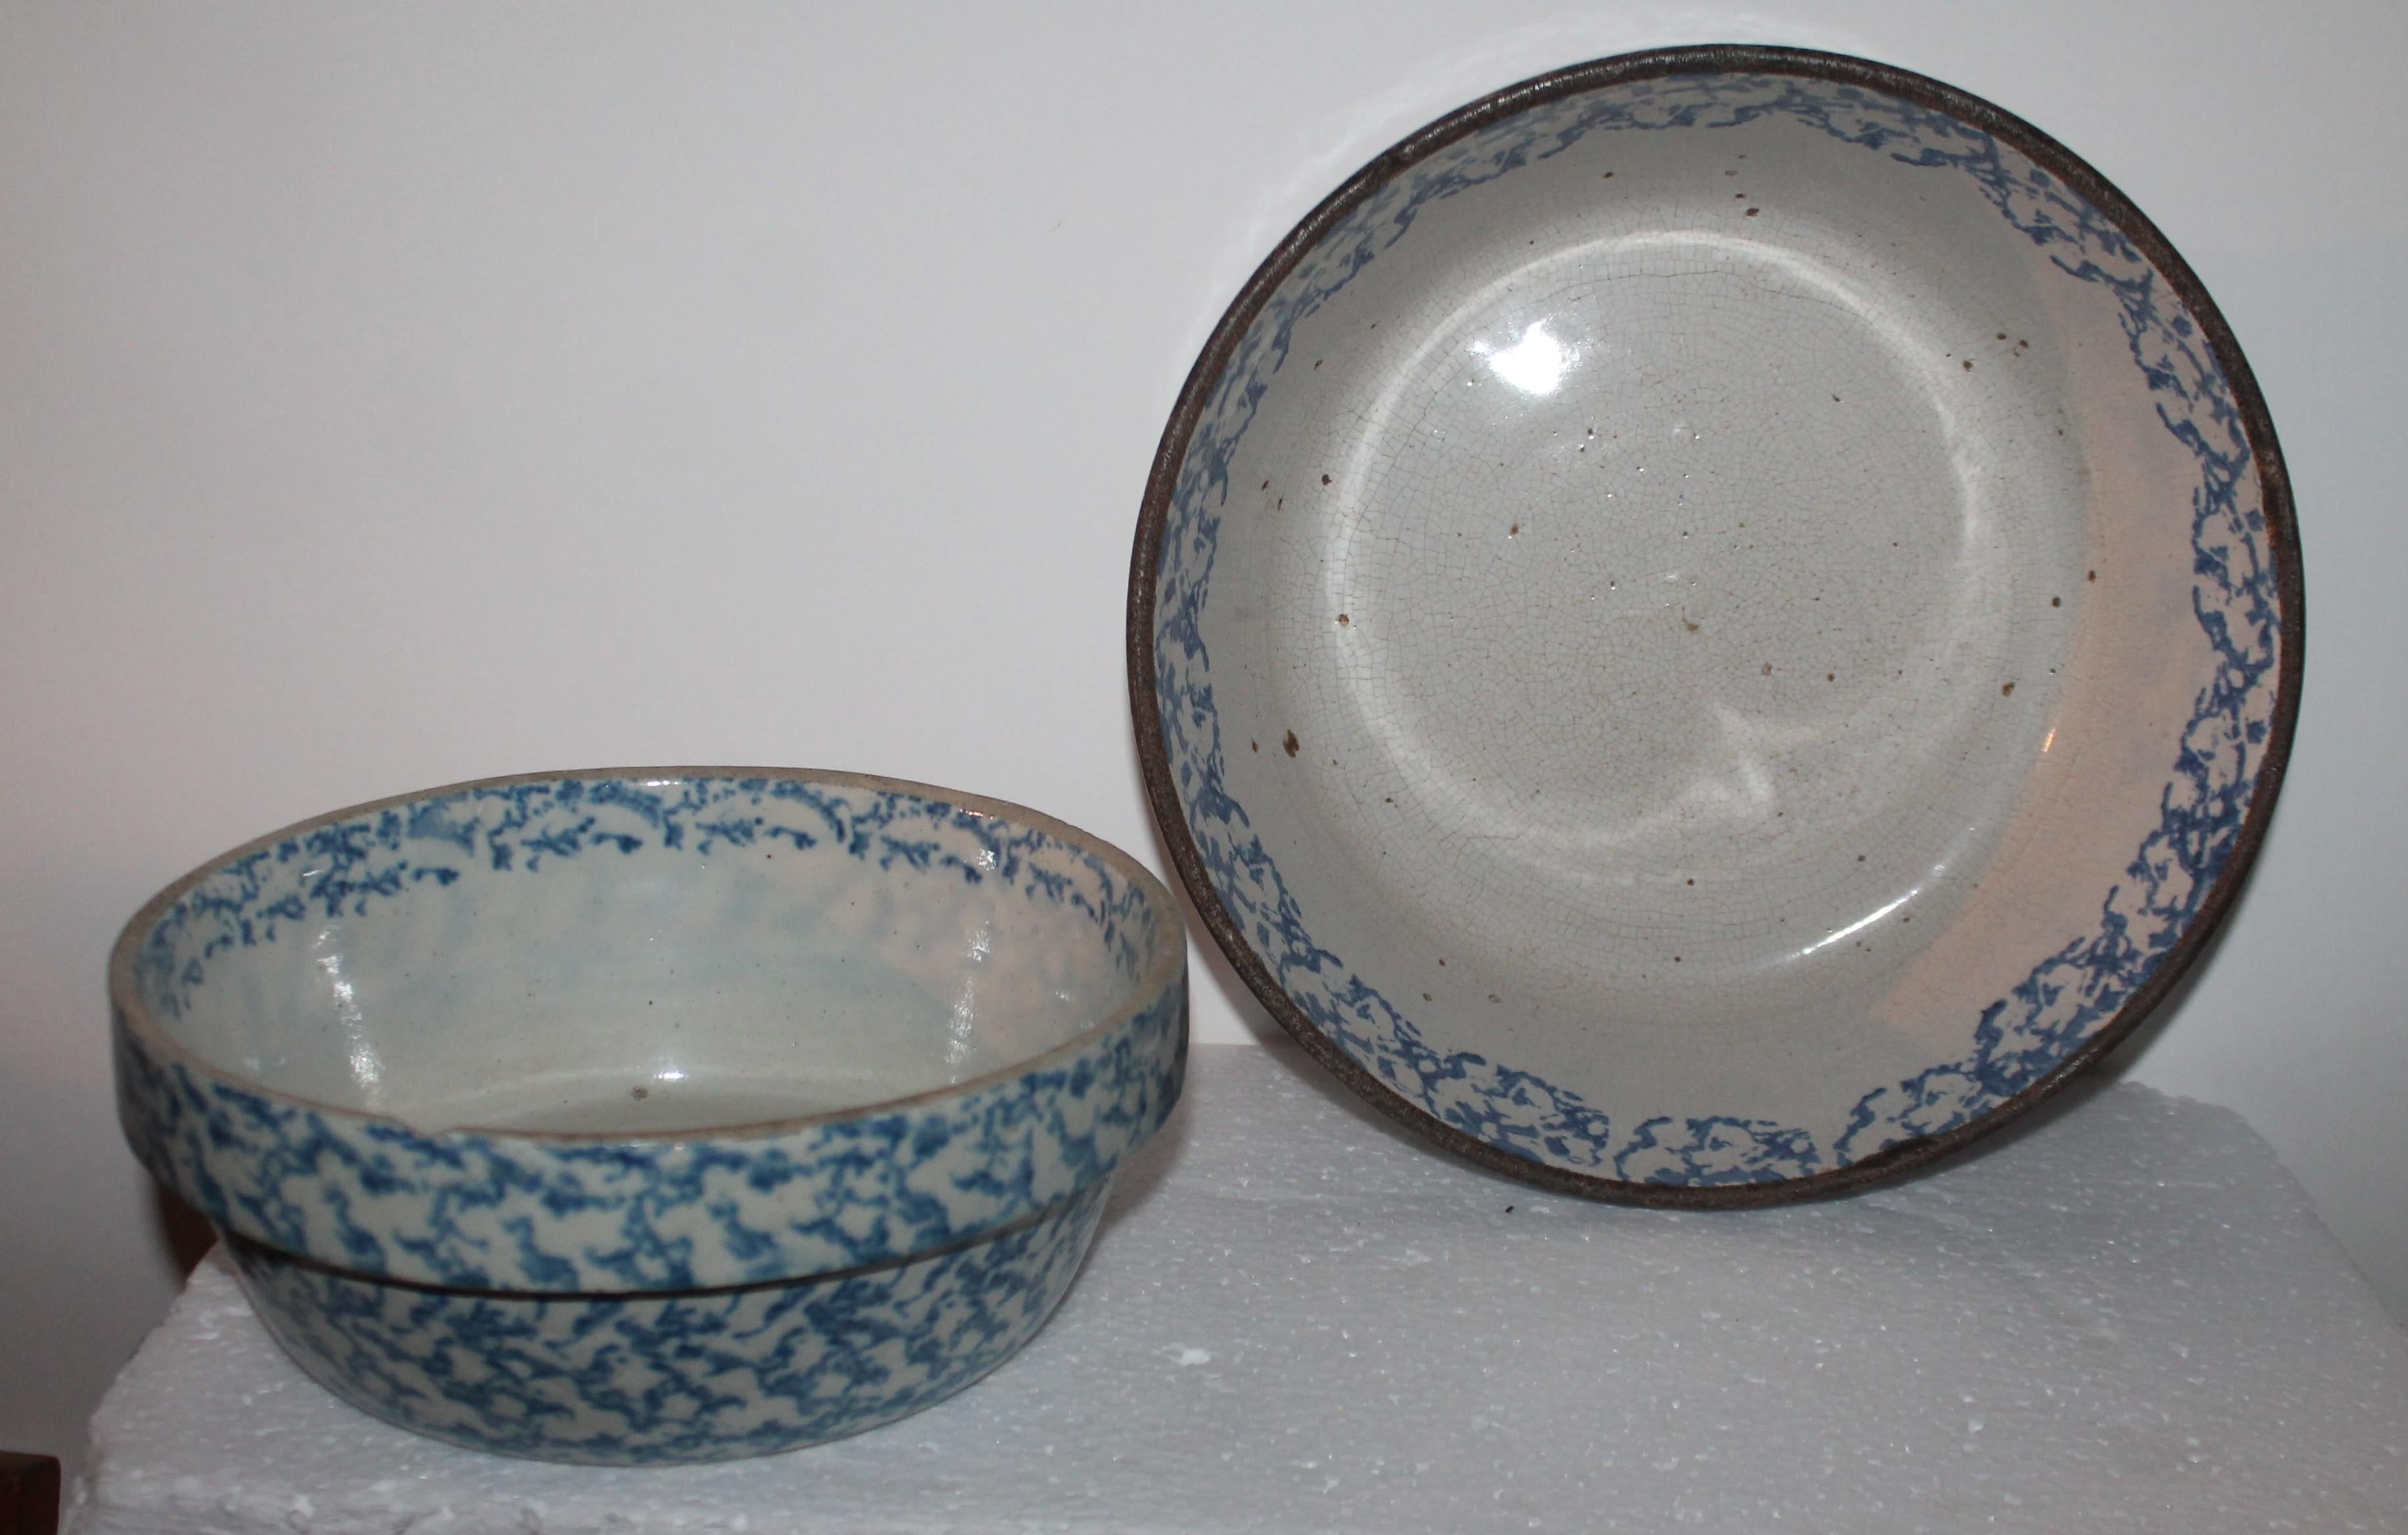 These two 19th century sponge bake dishes or serving crocks are in fine condition. Great colors.

Larger bowl measures: 10.5 x 3.5

Smaller bowl measures: 9.5 x 3.25.